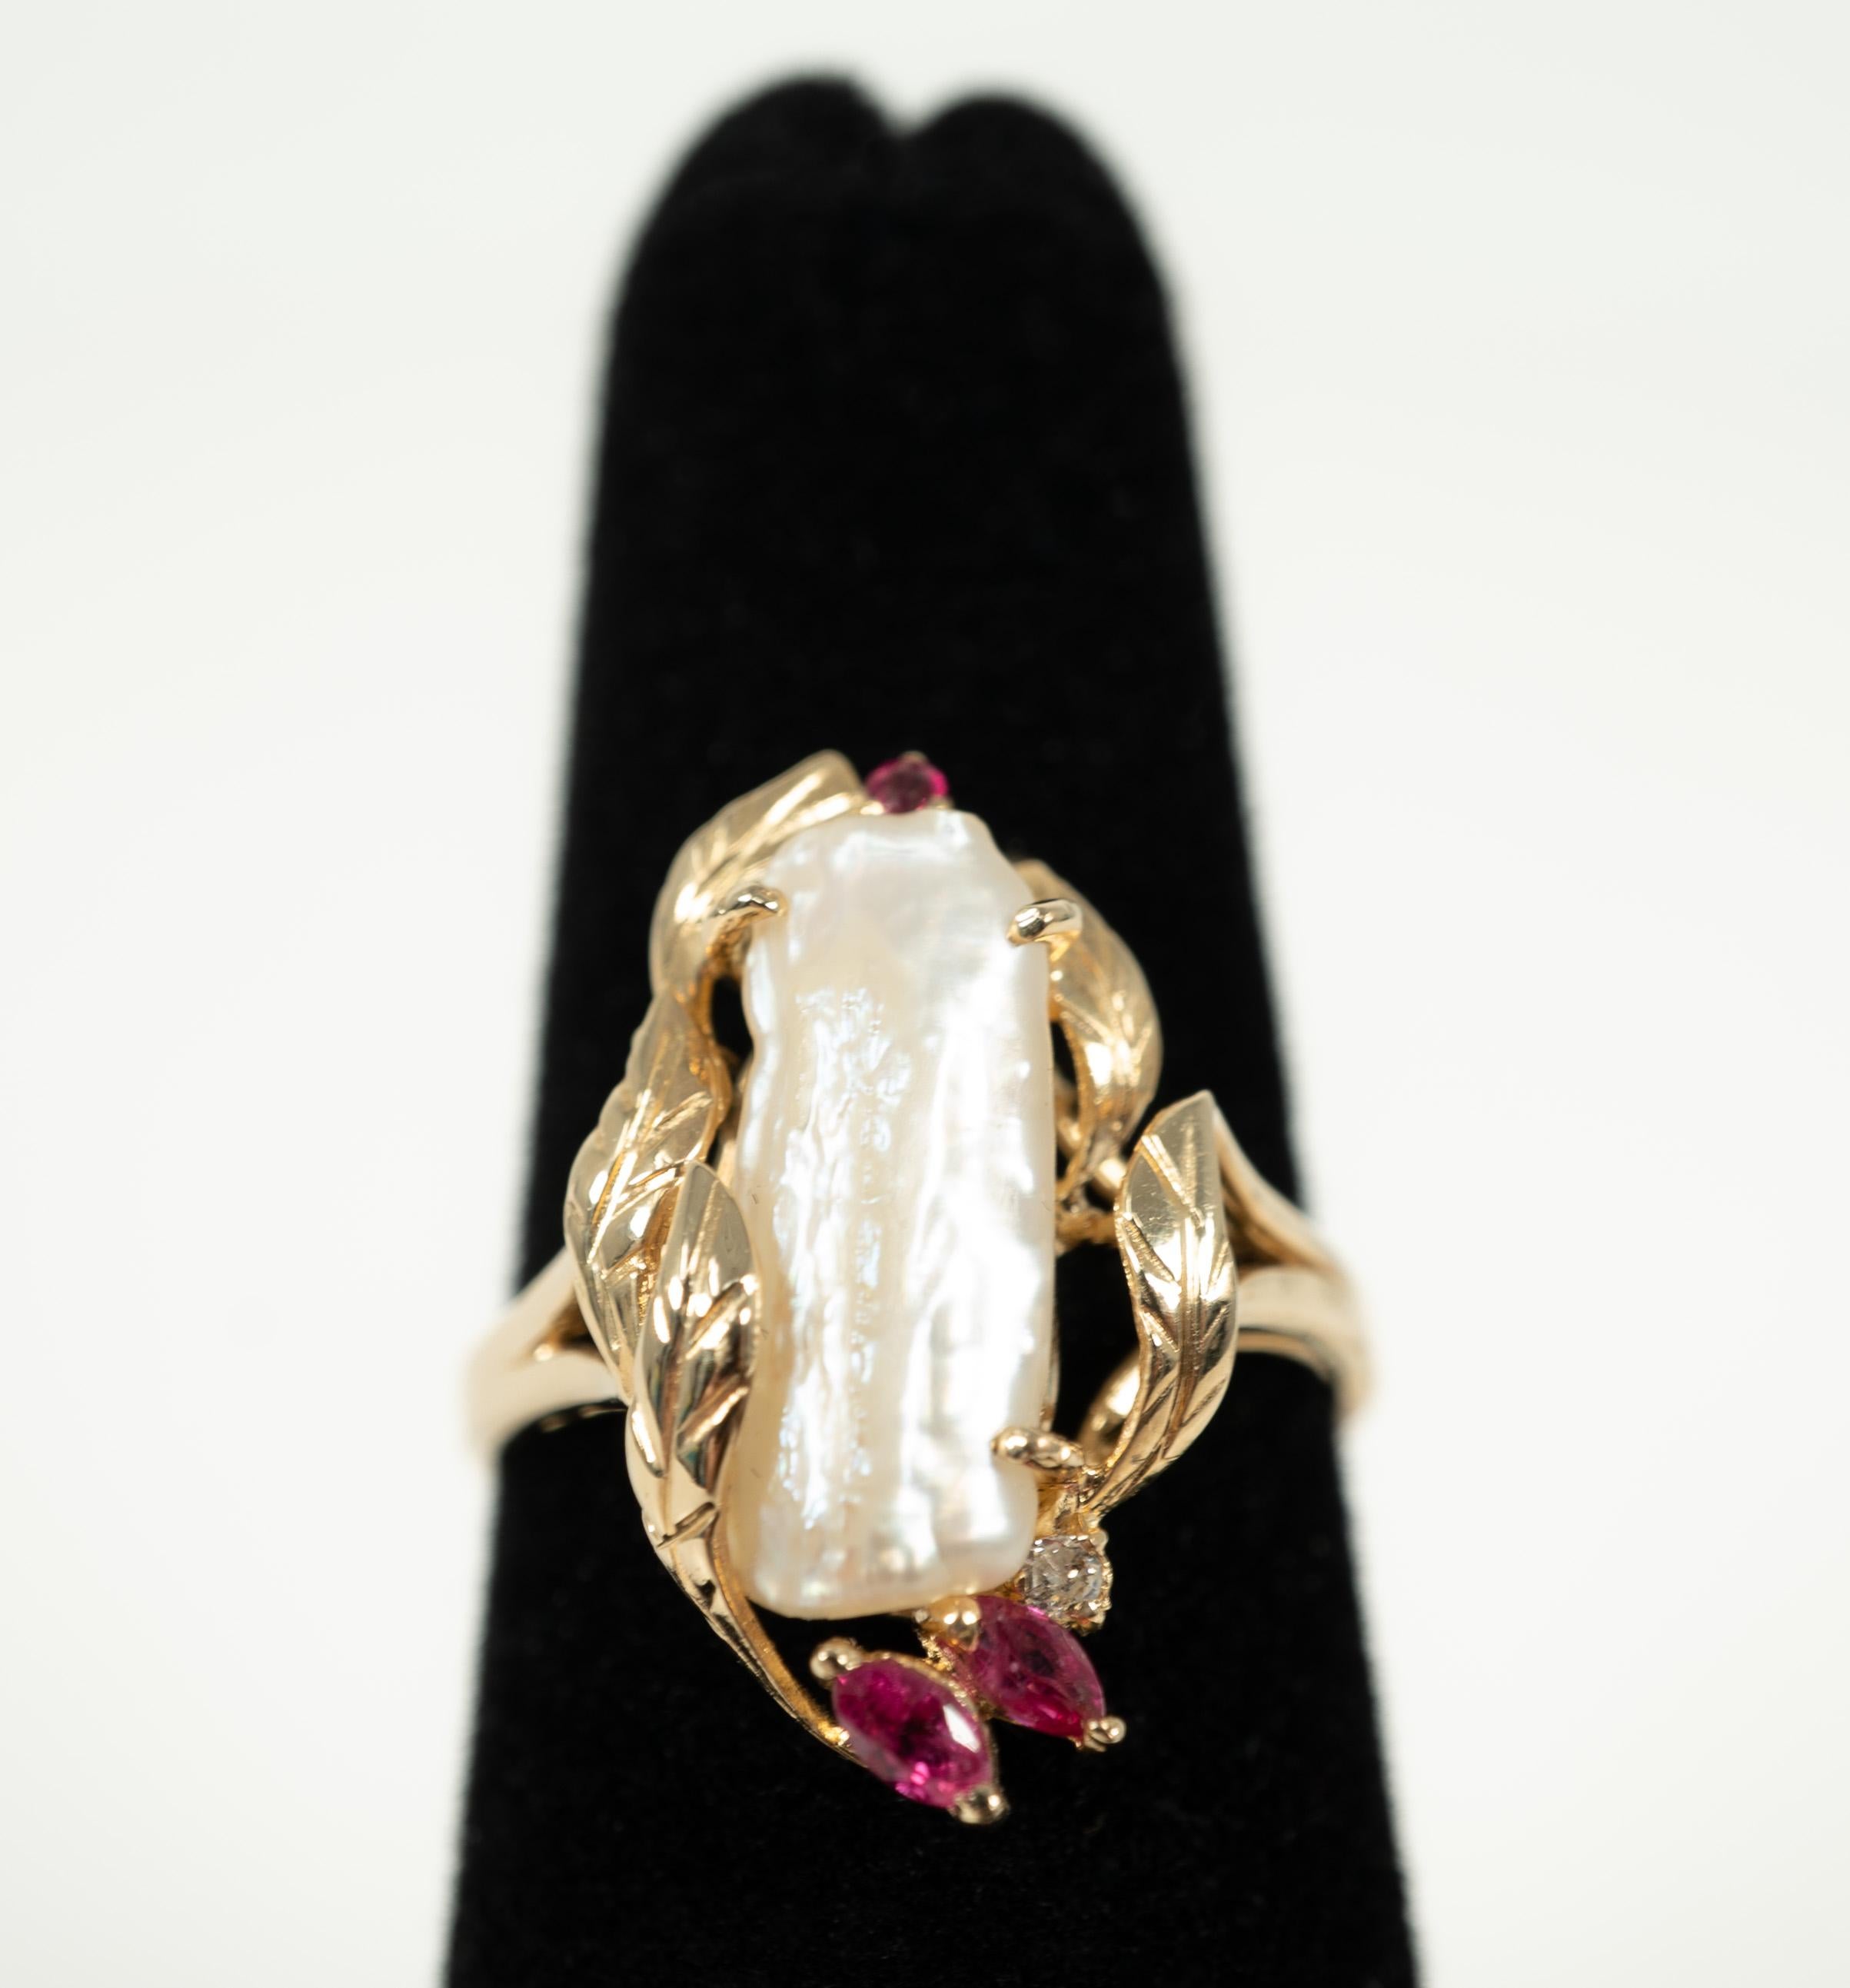 In 14 karat yellow gold, this freshwater pearl is accented with rubies and one diamond. 